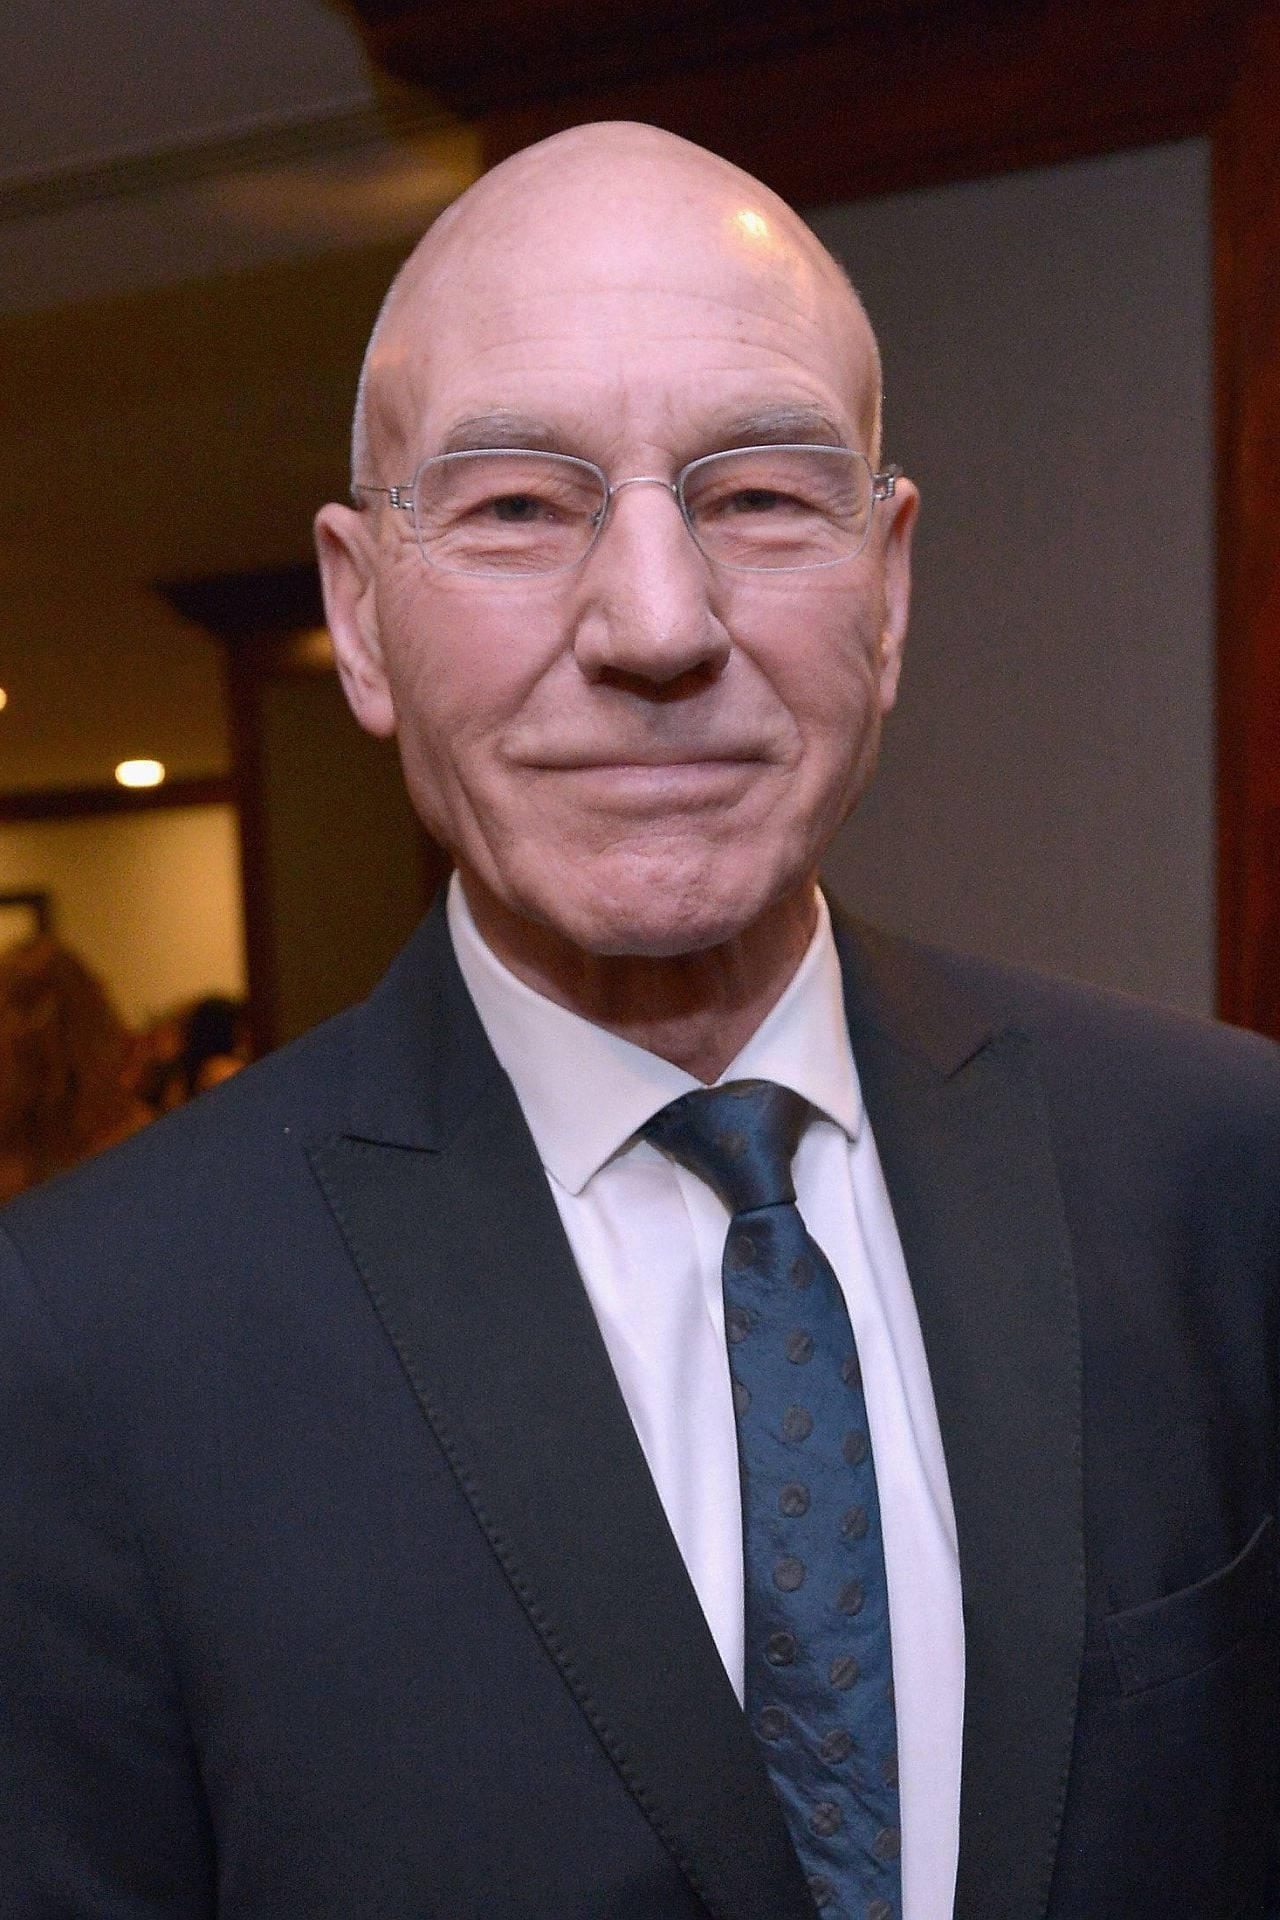 Patrick Stewart With A Beaming Smile Wallpaper